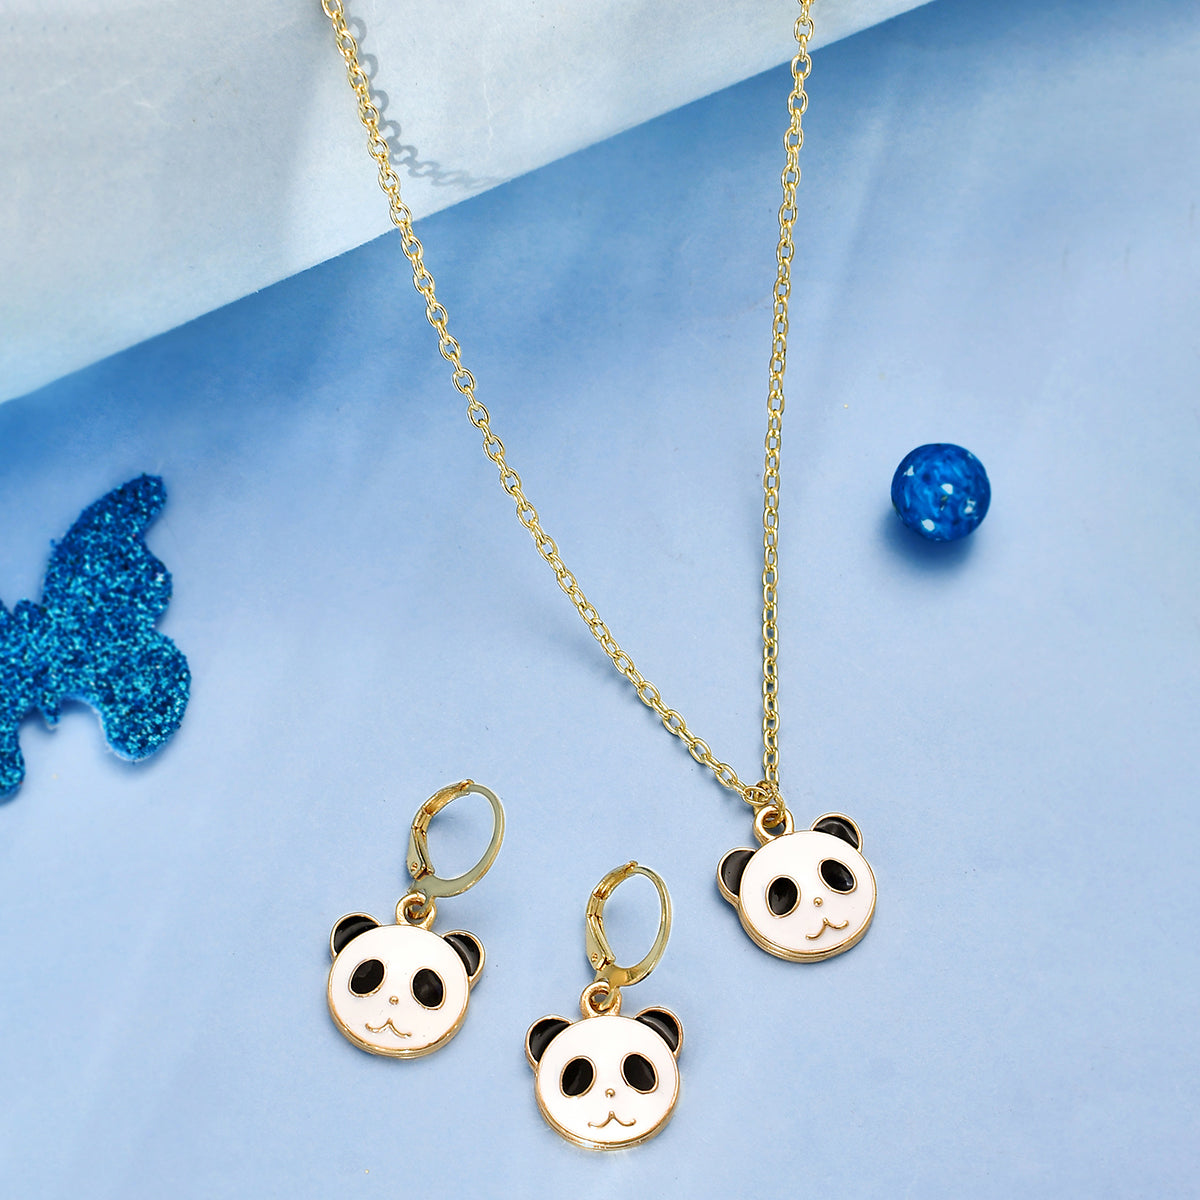 Solid Rose Gold Panda Pendant Necklace